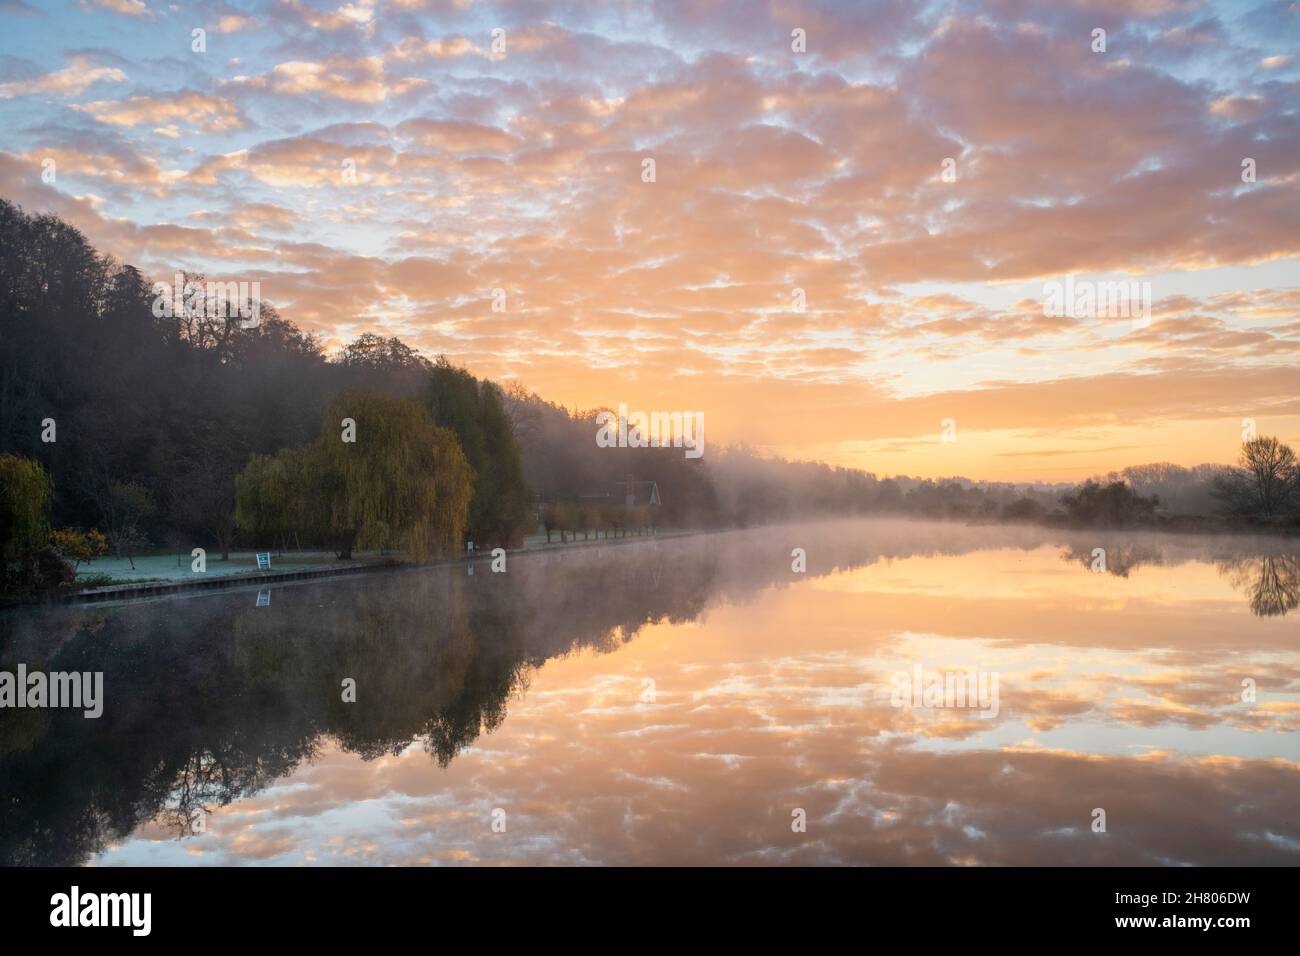 Misty sunrise and reflections along the River Thames. Henley-on-Thames, Berkshire / Oxfordshire, England Stock Photo